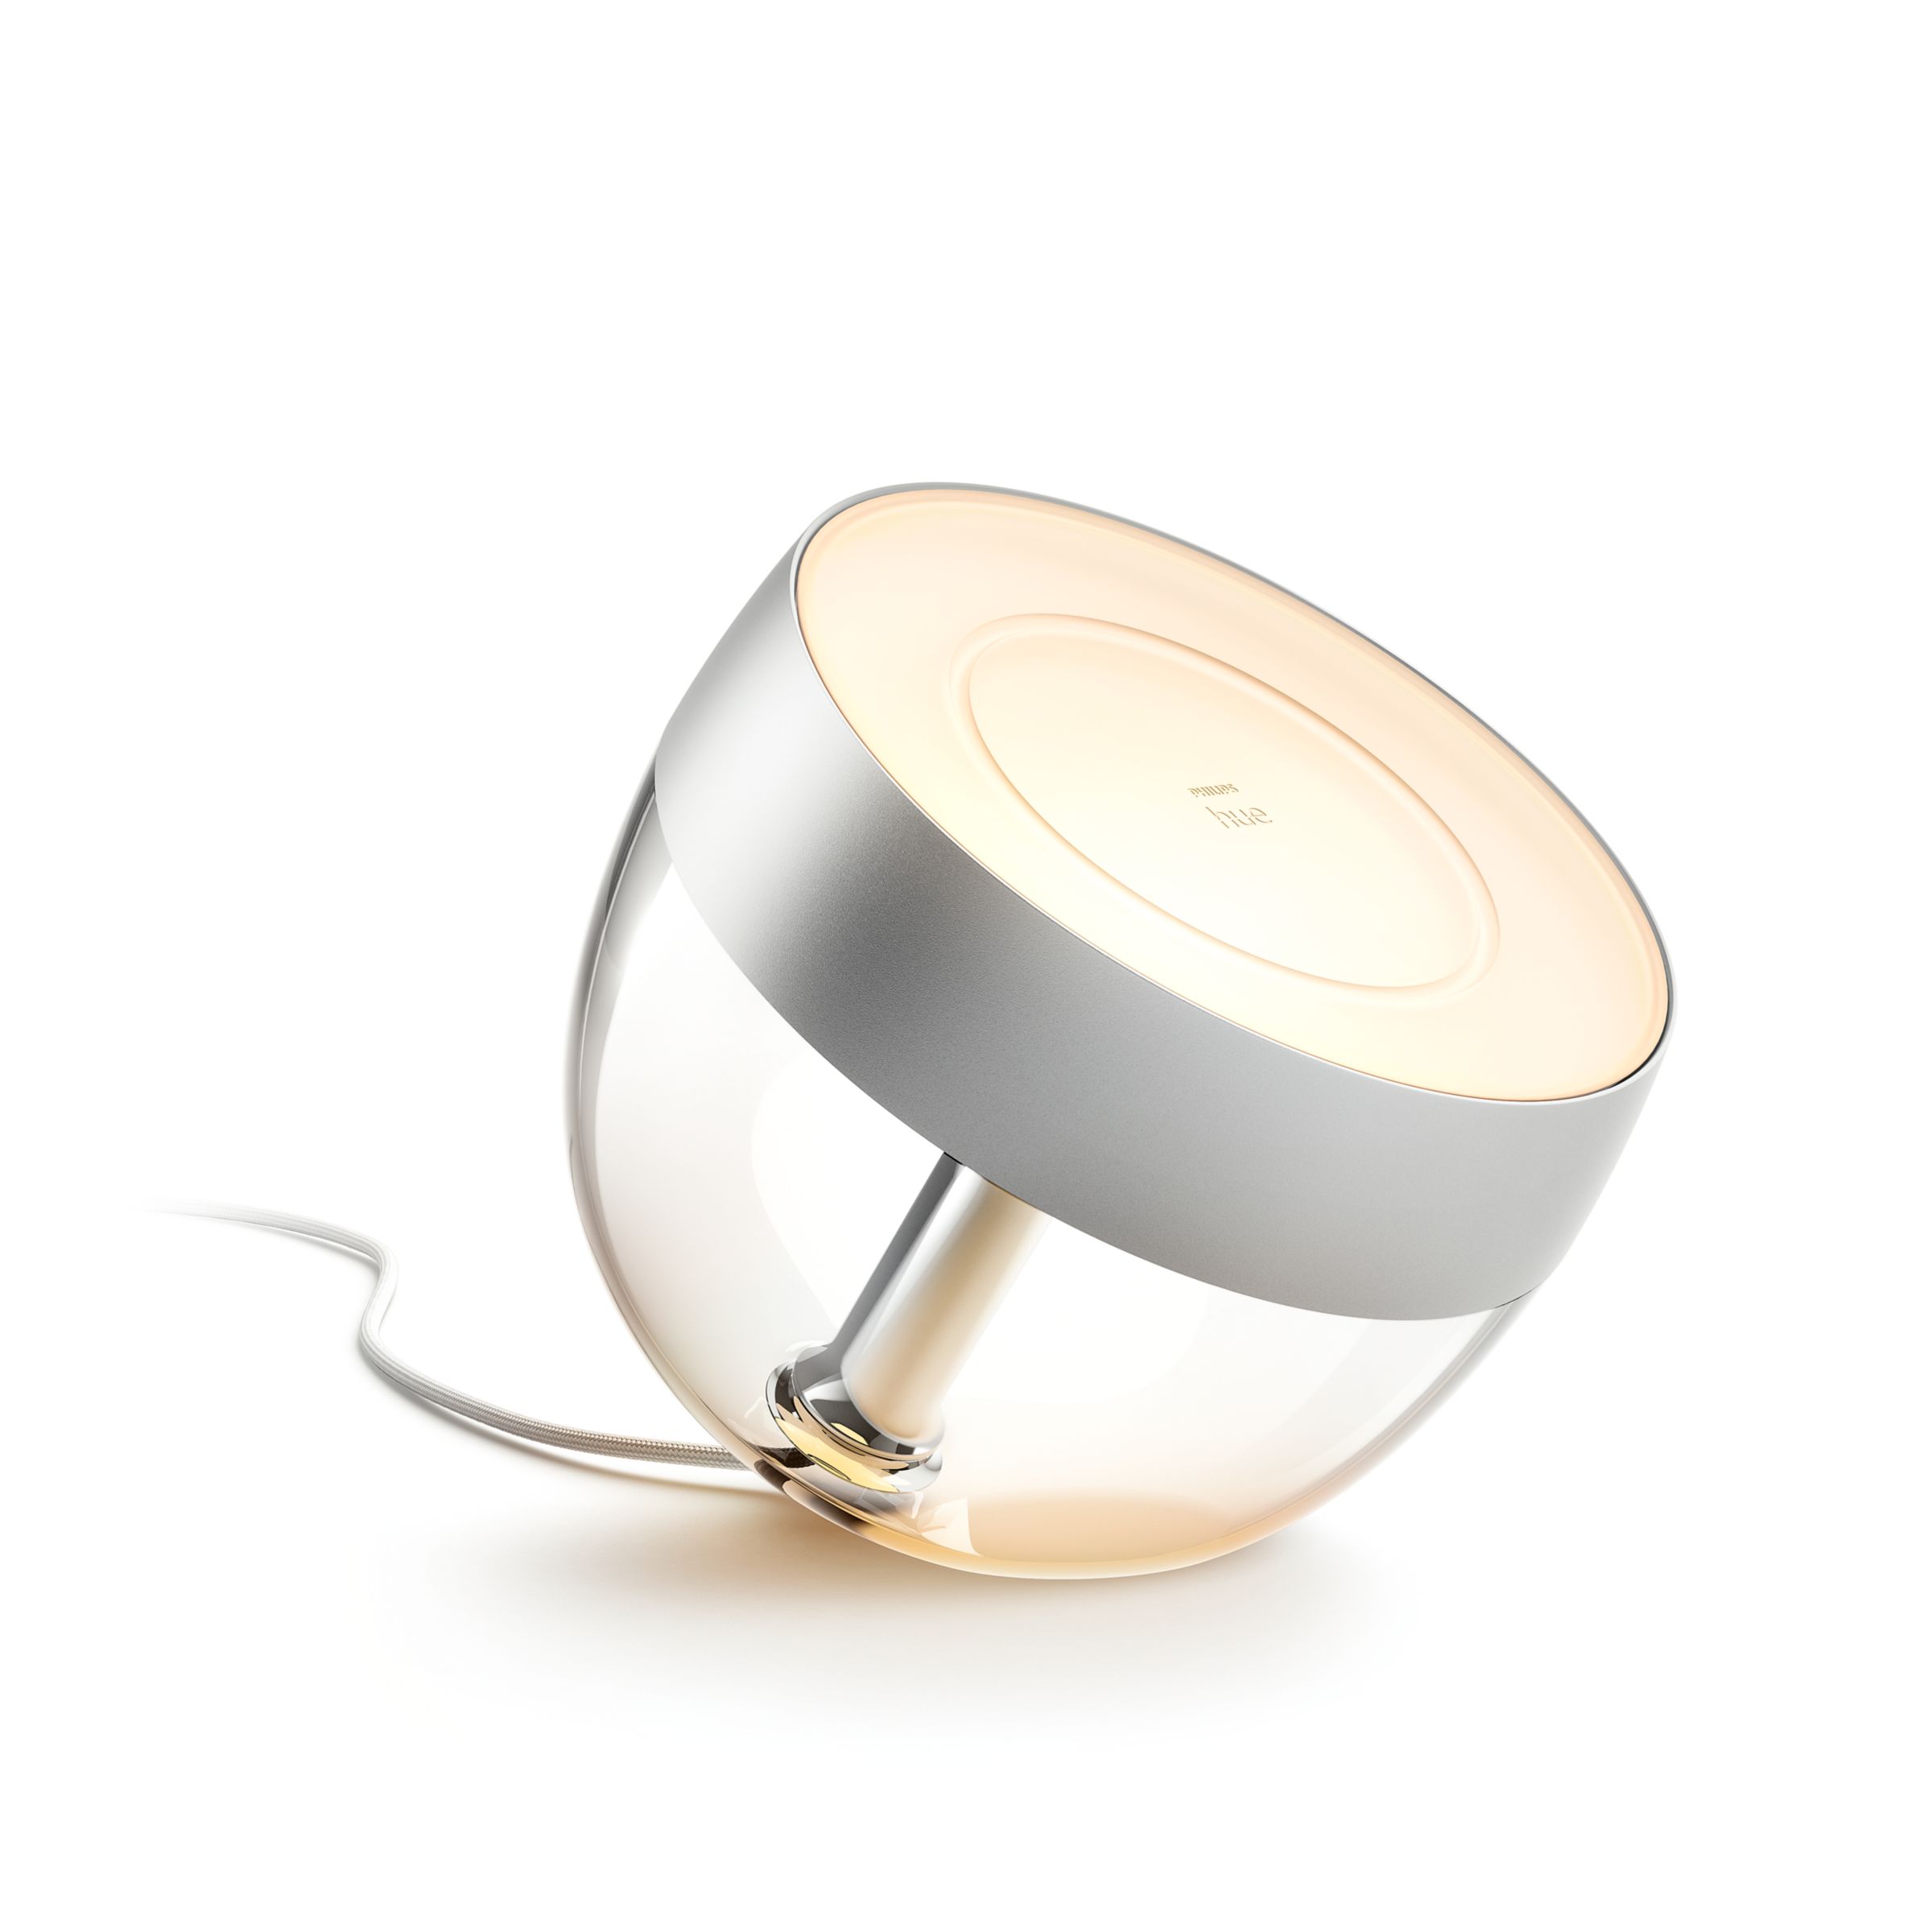 Hue Iris Table Lamp Silver Special Edition | Philips Hue